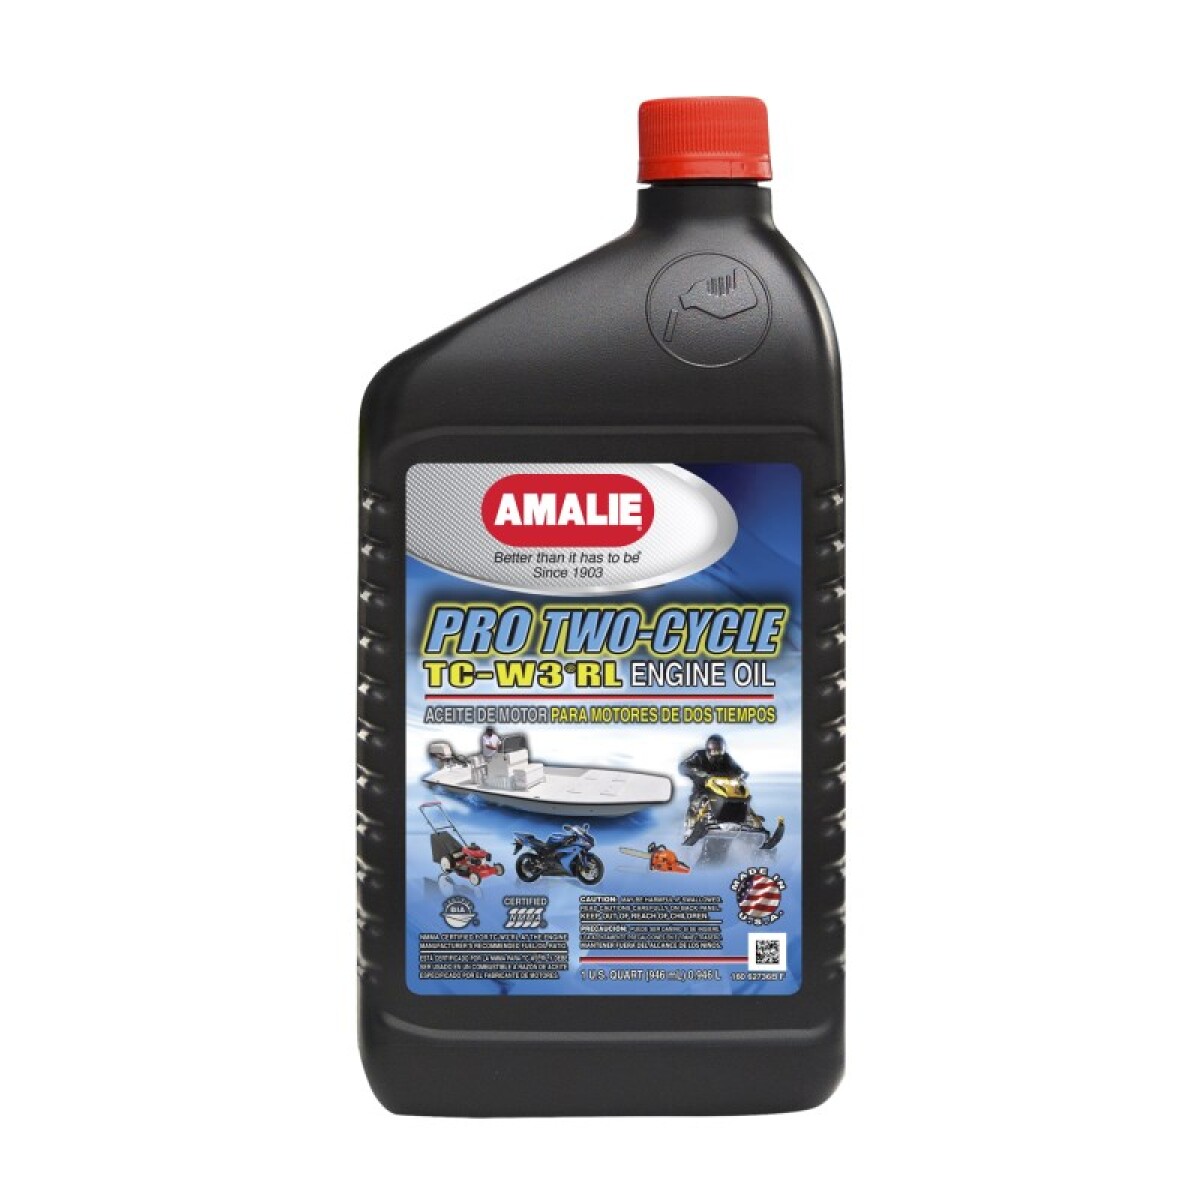 LUBRICANTE ACEITES - PRO TWO CYCLE ENGINE TCW3 1 LT AMALIE MOTOR OIL 